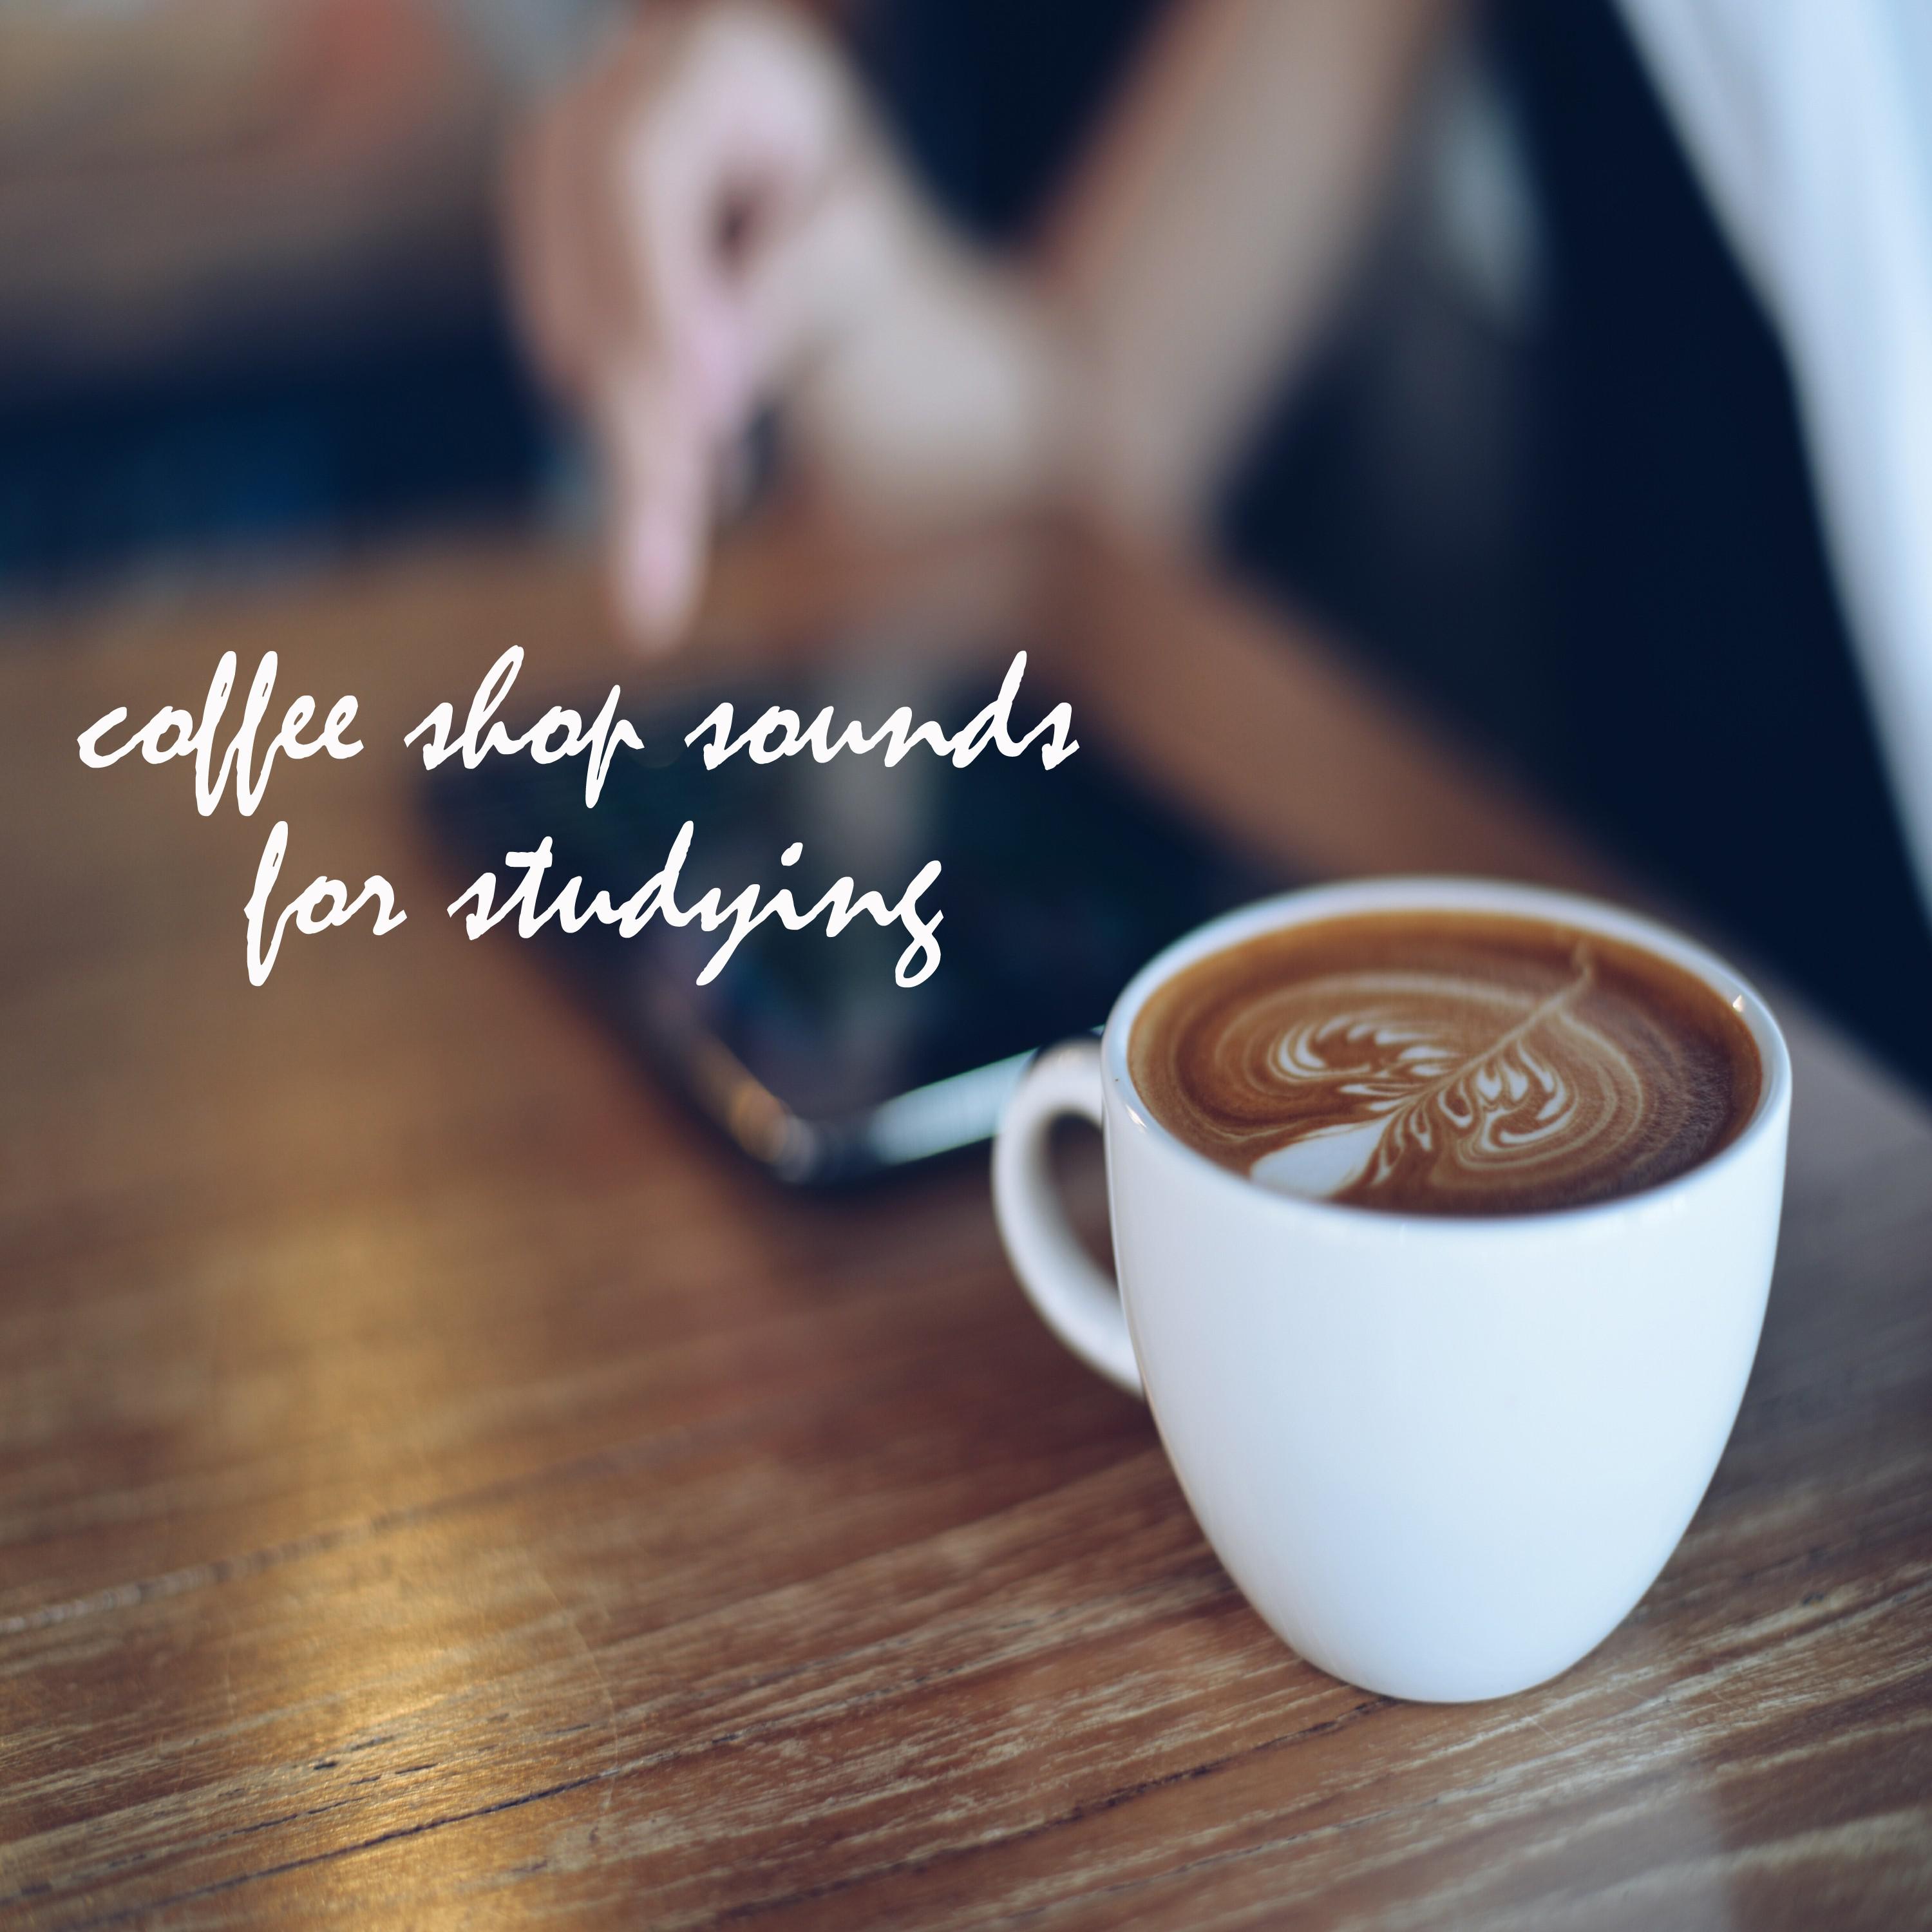 Coffee Shop Sounds for Studying and Working, Pt. 41